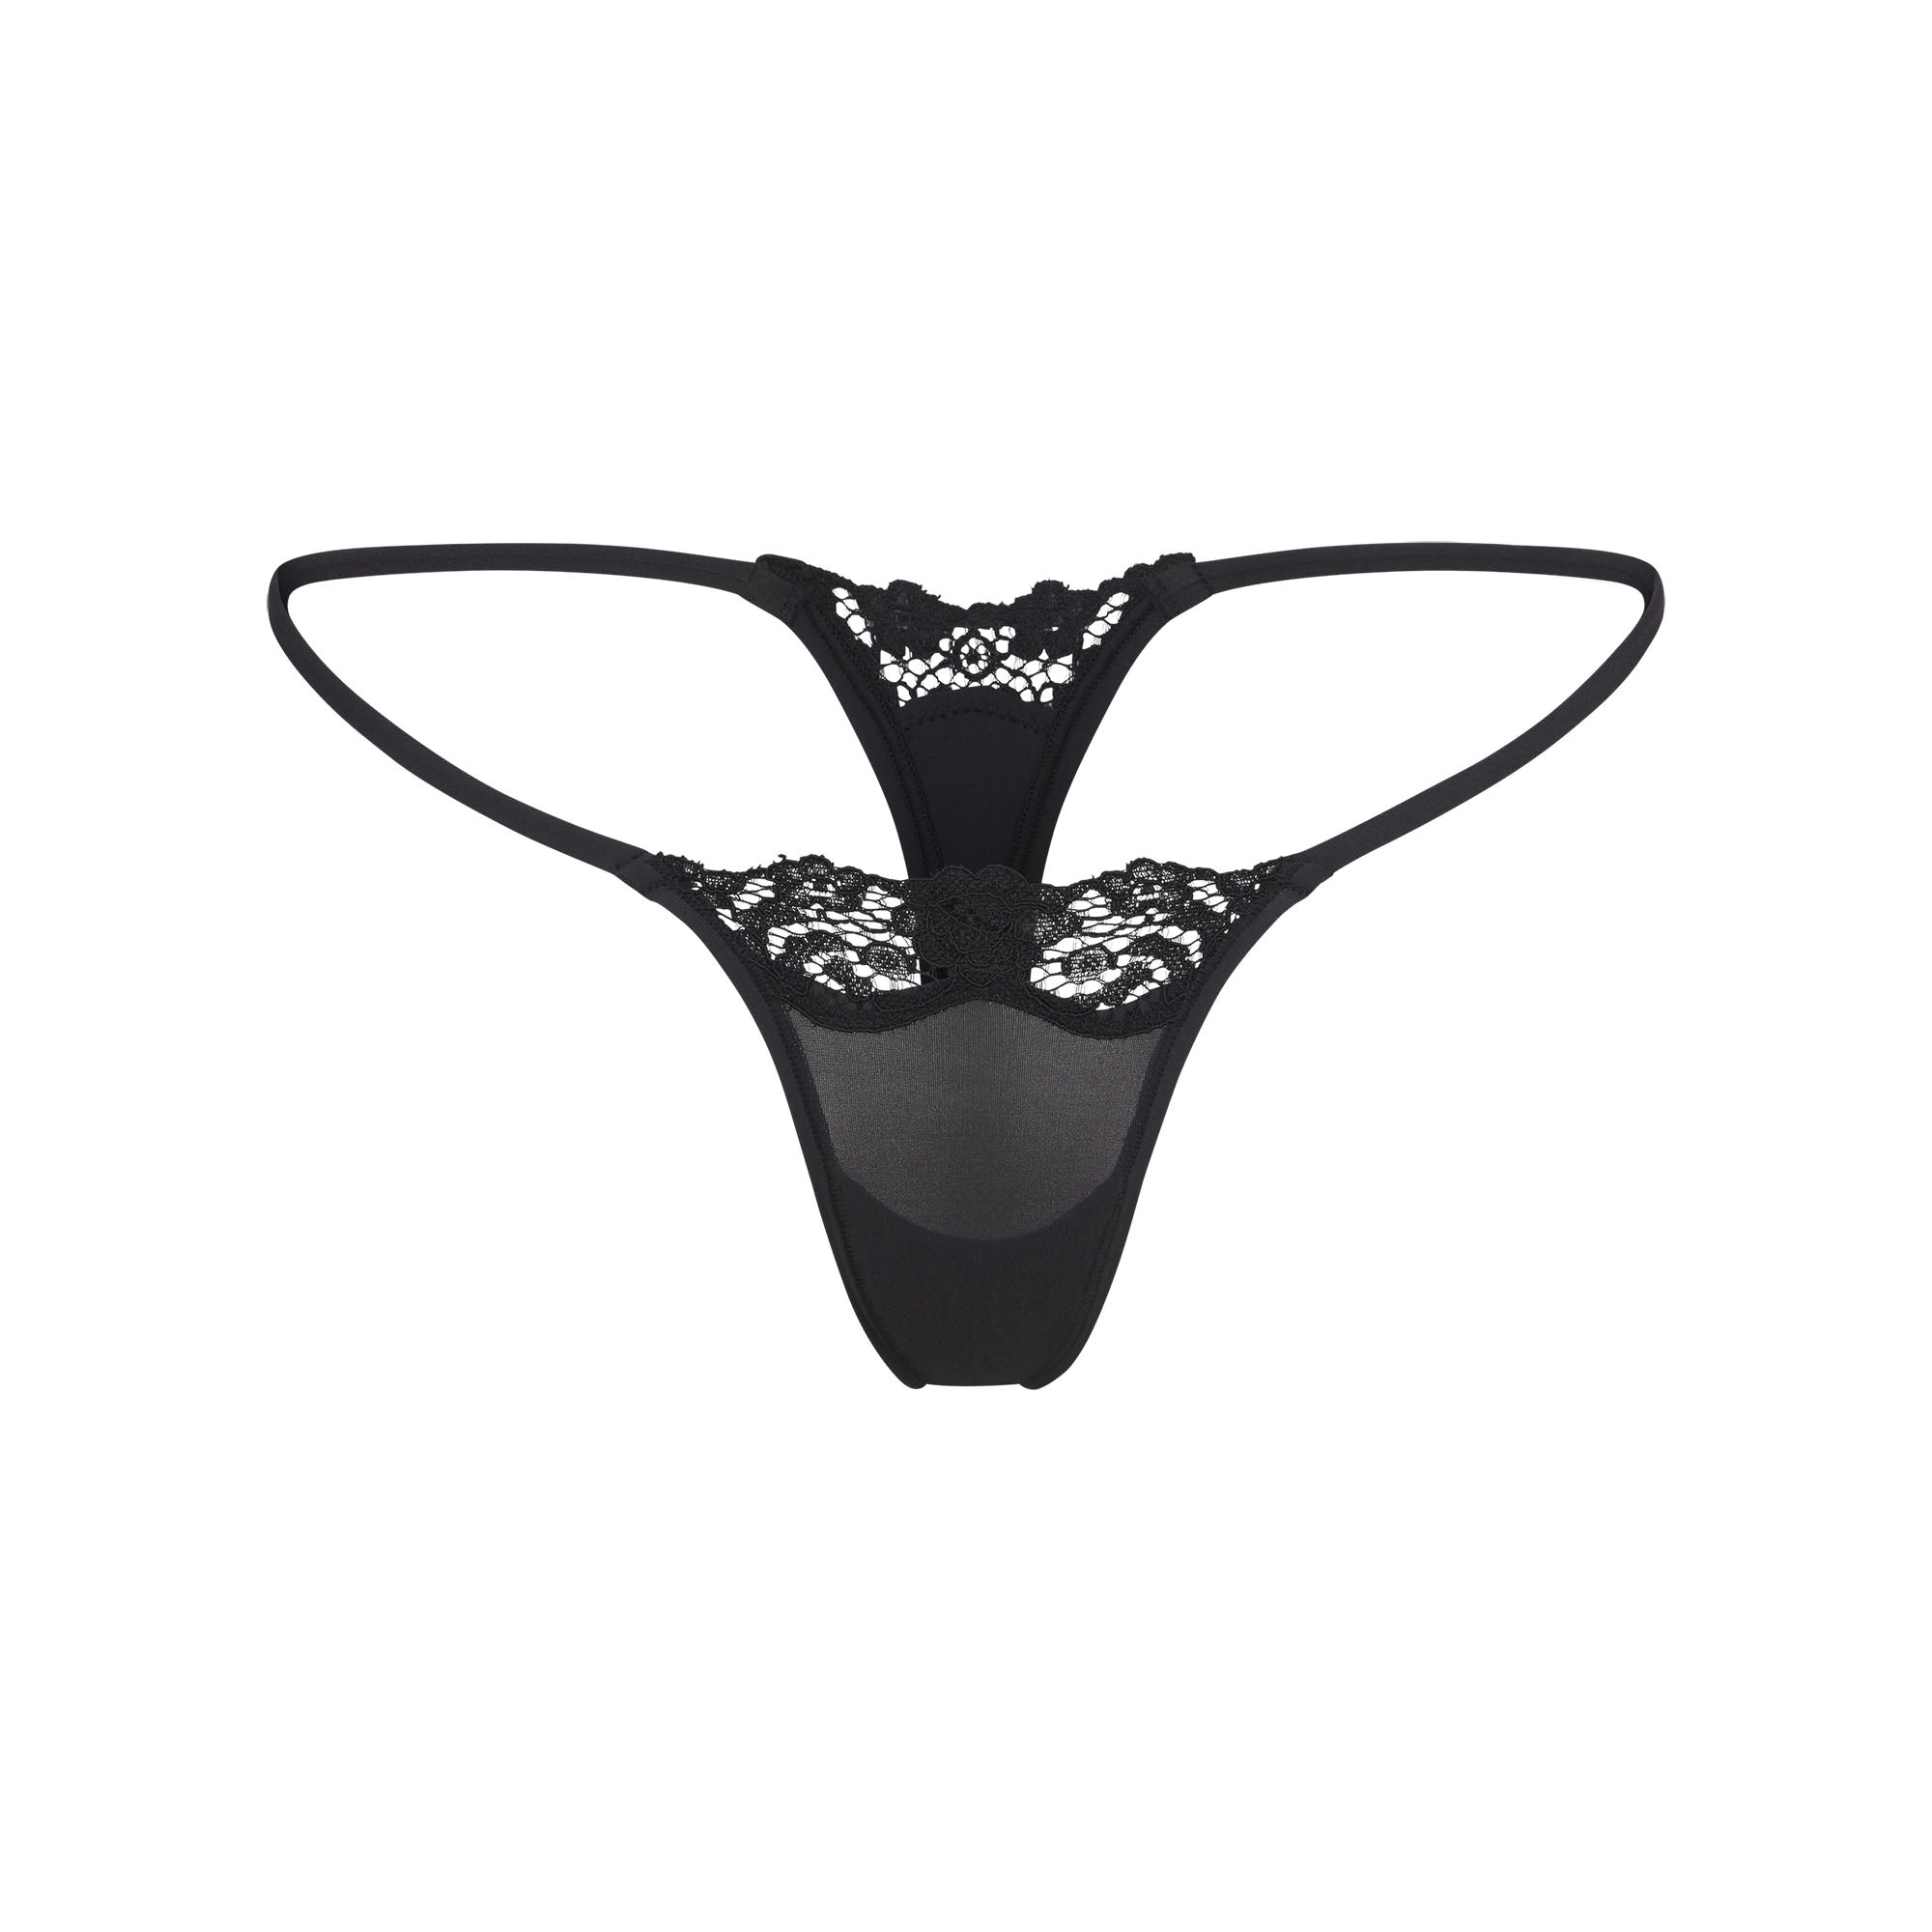 After Midnight Crotchless G-String